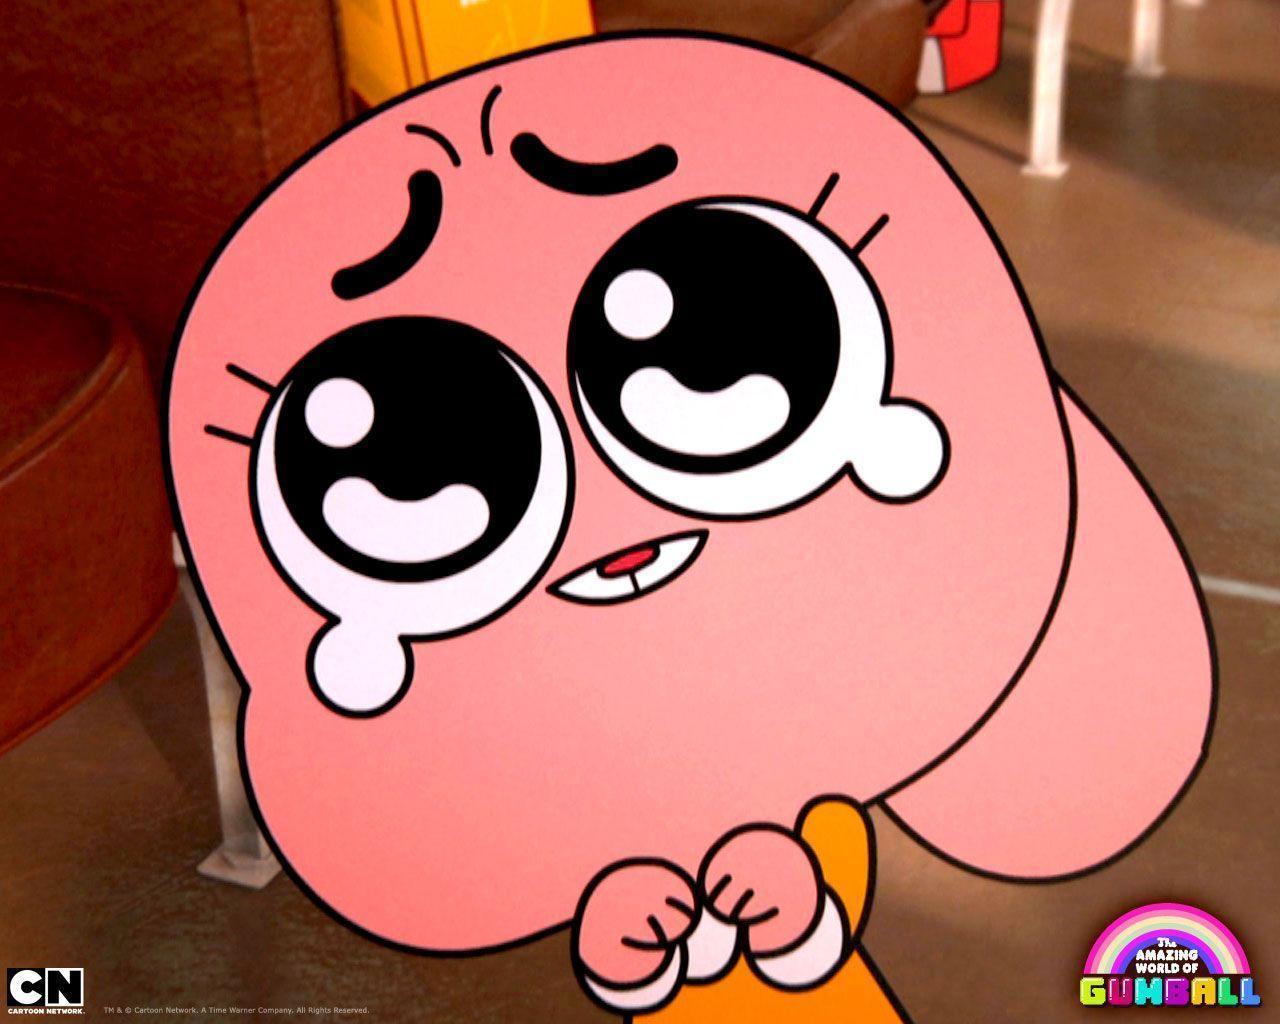 The Amazing World of Gumball. Picture and Wallpaper. Cartoon